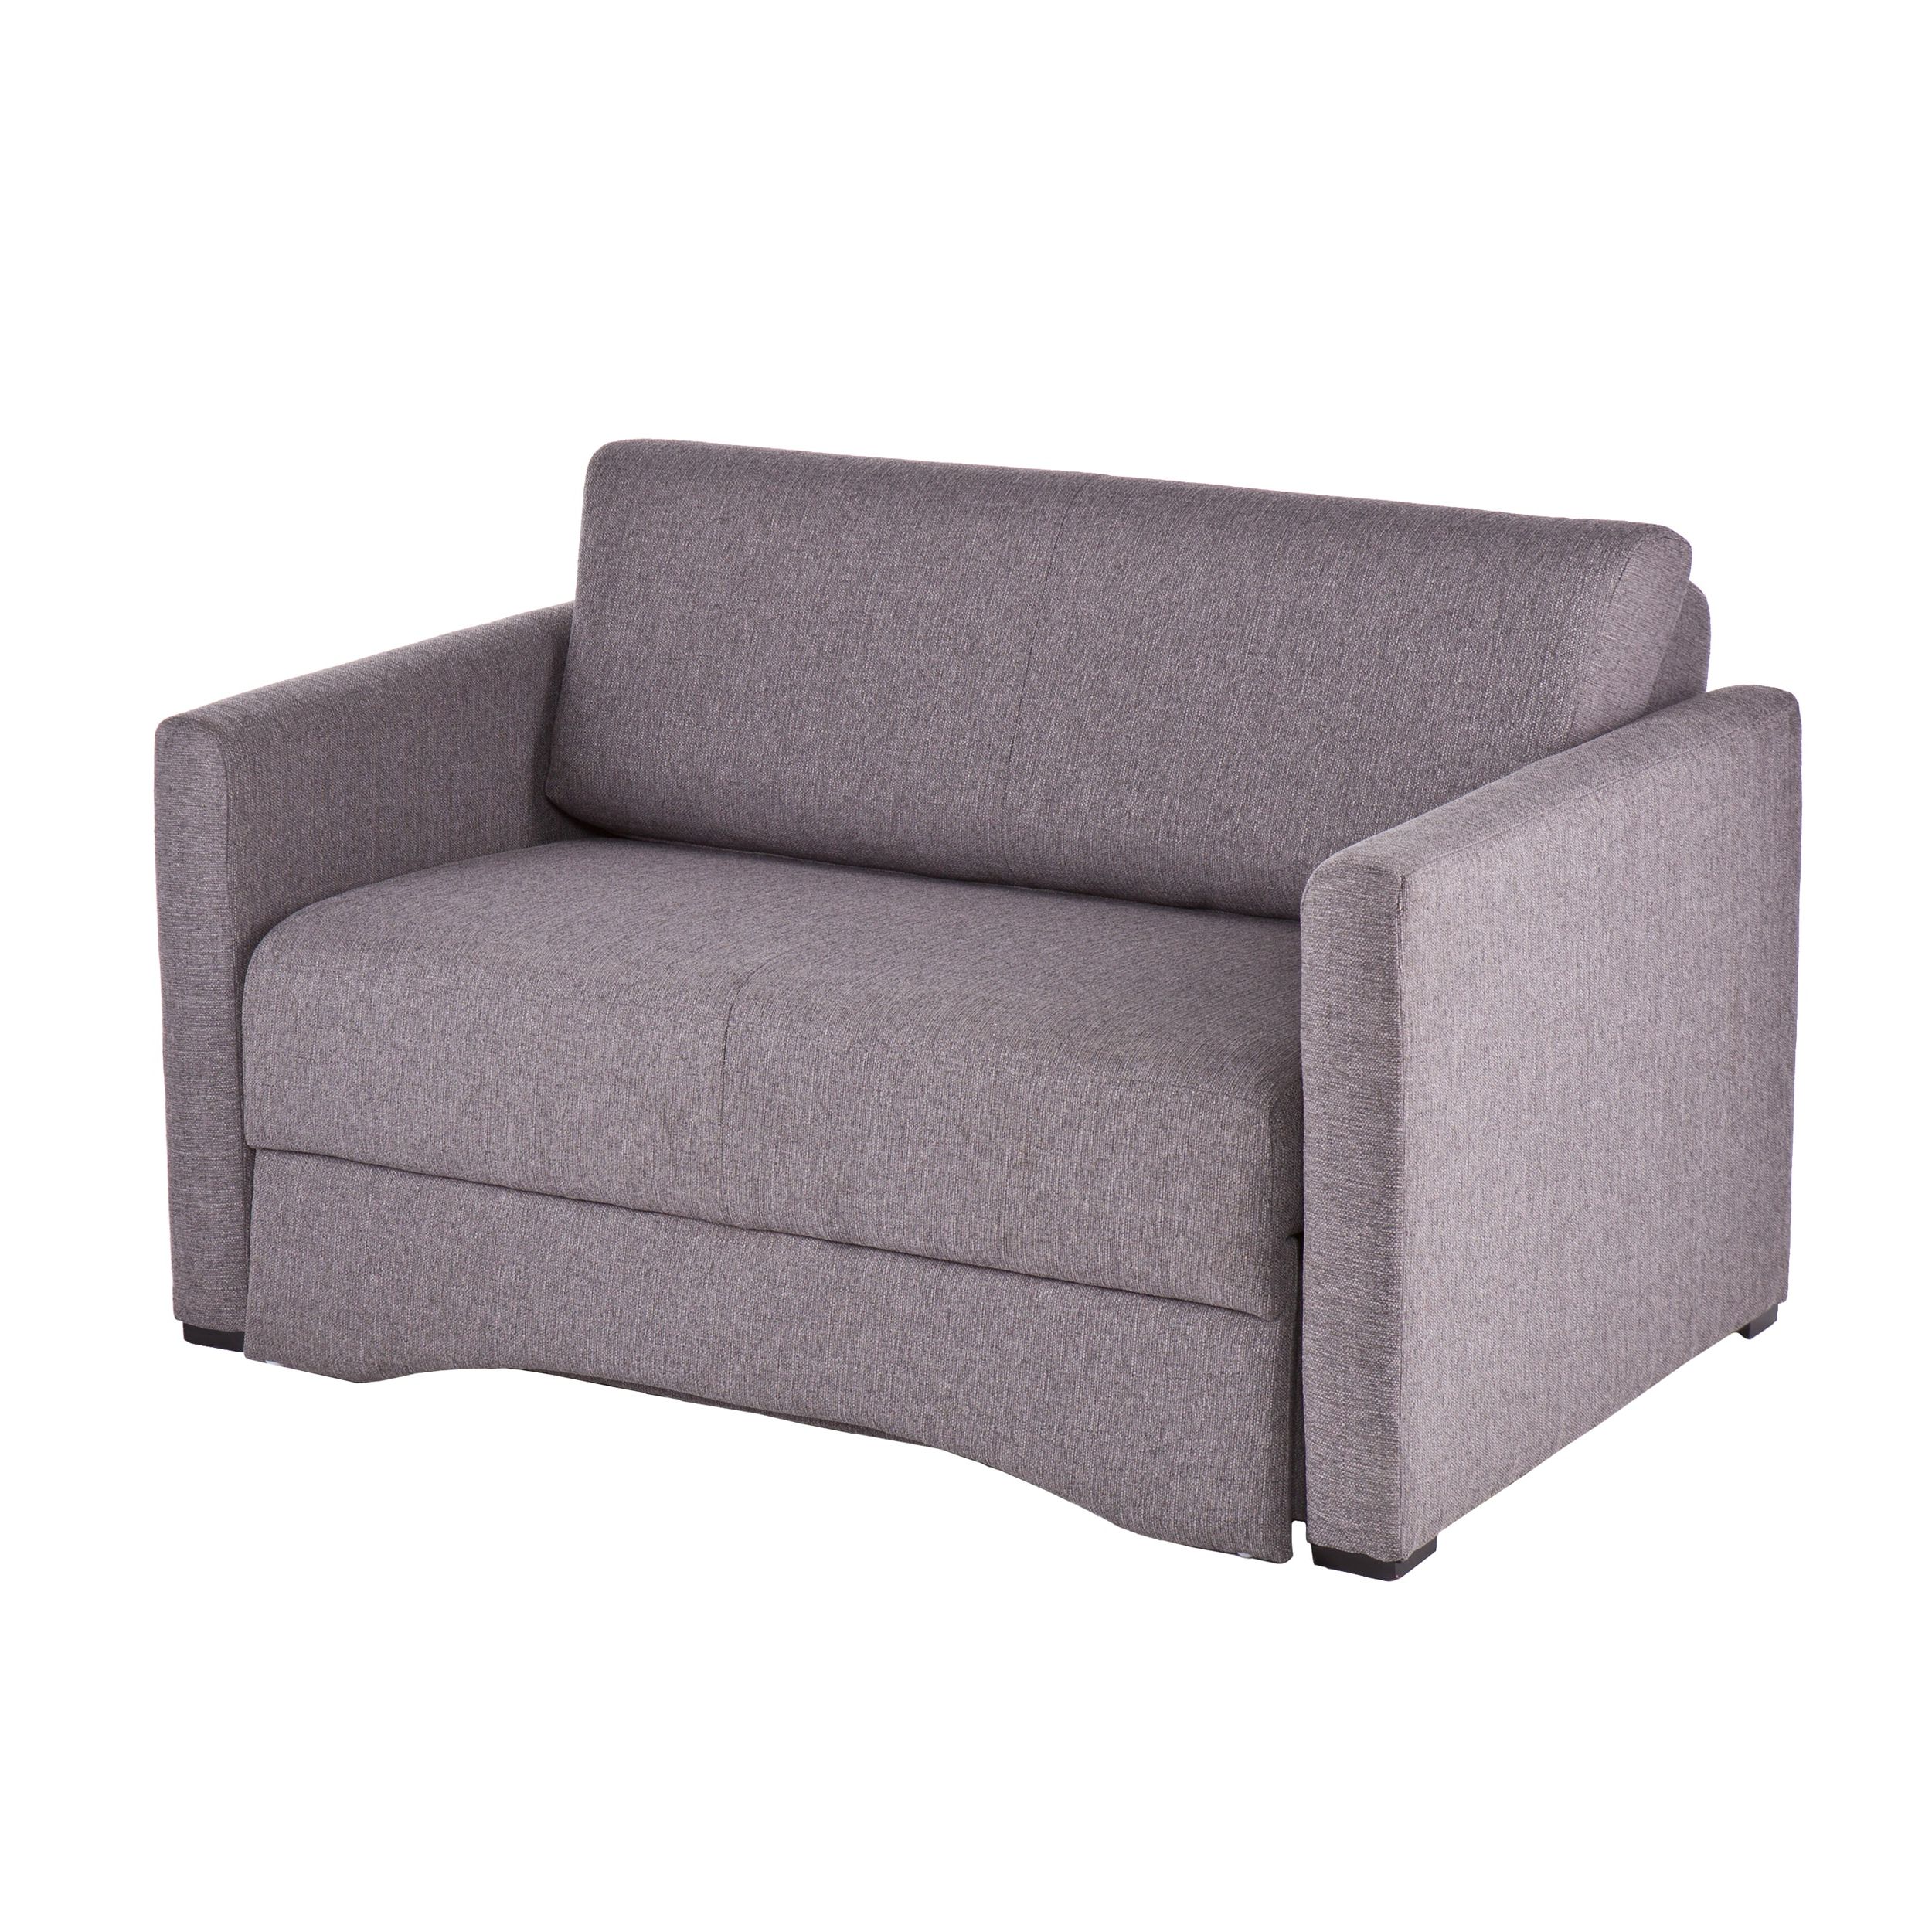 Famous Shop Harper Blvd Ventura Gray Loveseat Sleeper – Free Shipping Today Intended For Convertible Gray Loveseat Sleepers (Photo 9 of 15)